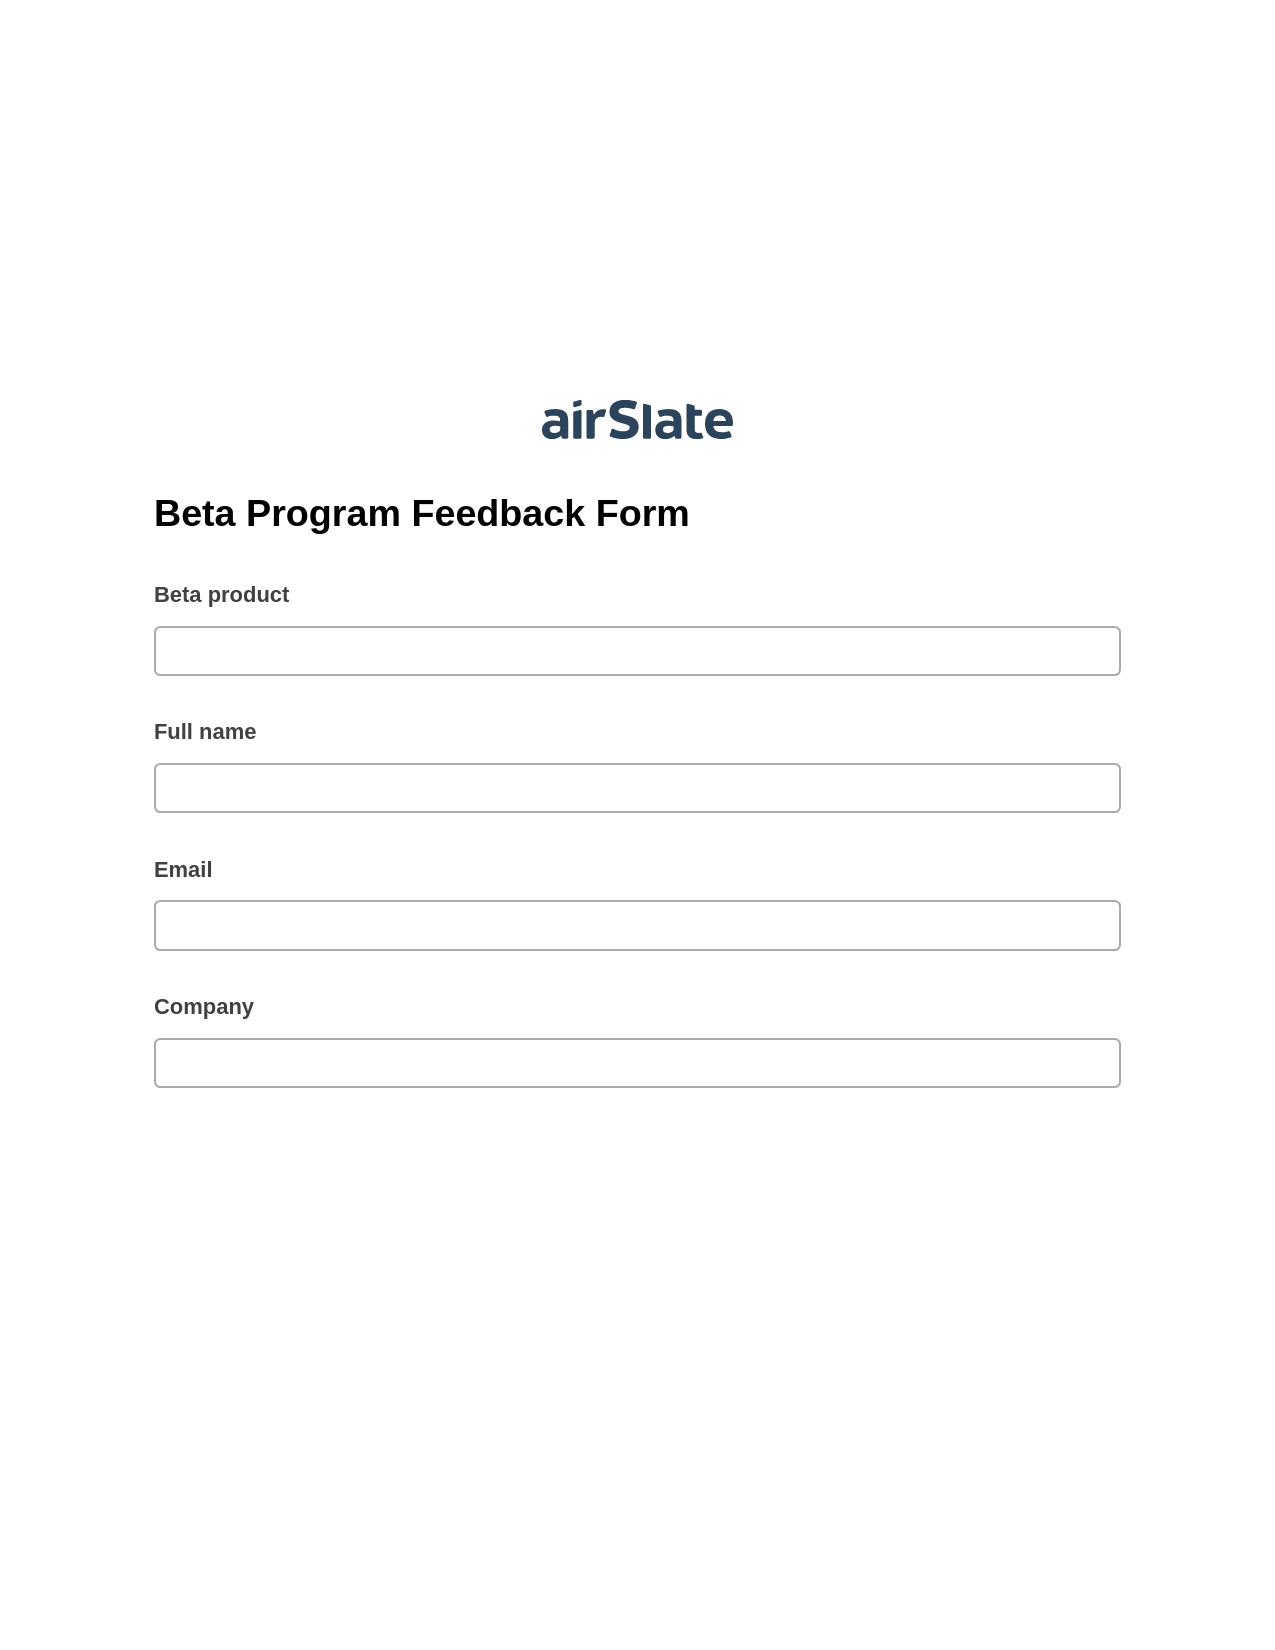 Beta Program Feedback Form Pre-fill Slate from MS Dynamics 365 Records Bot, SendGrid send Campaign bot, Export to NetSuite Record Bot